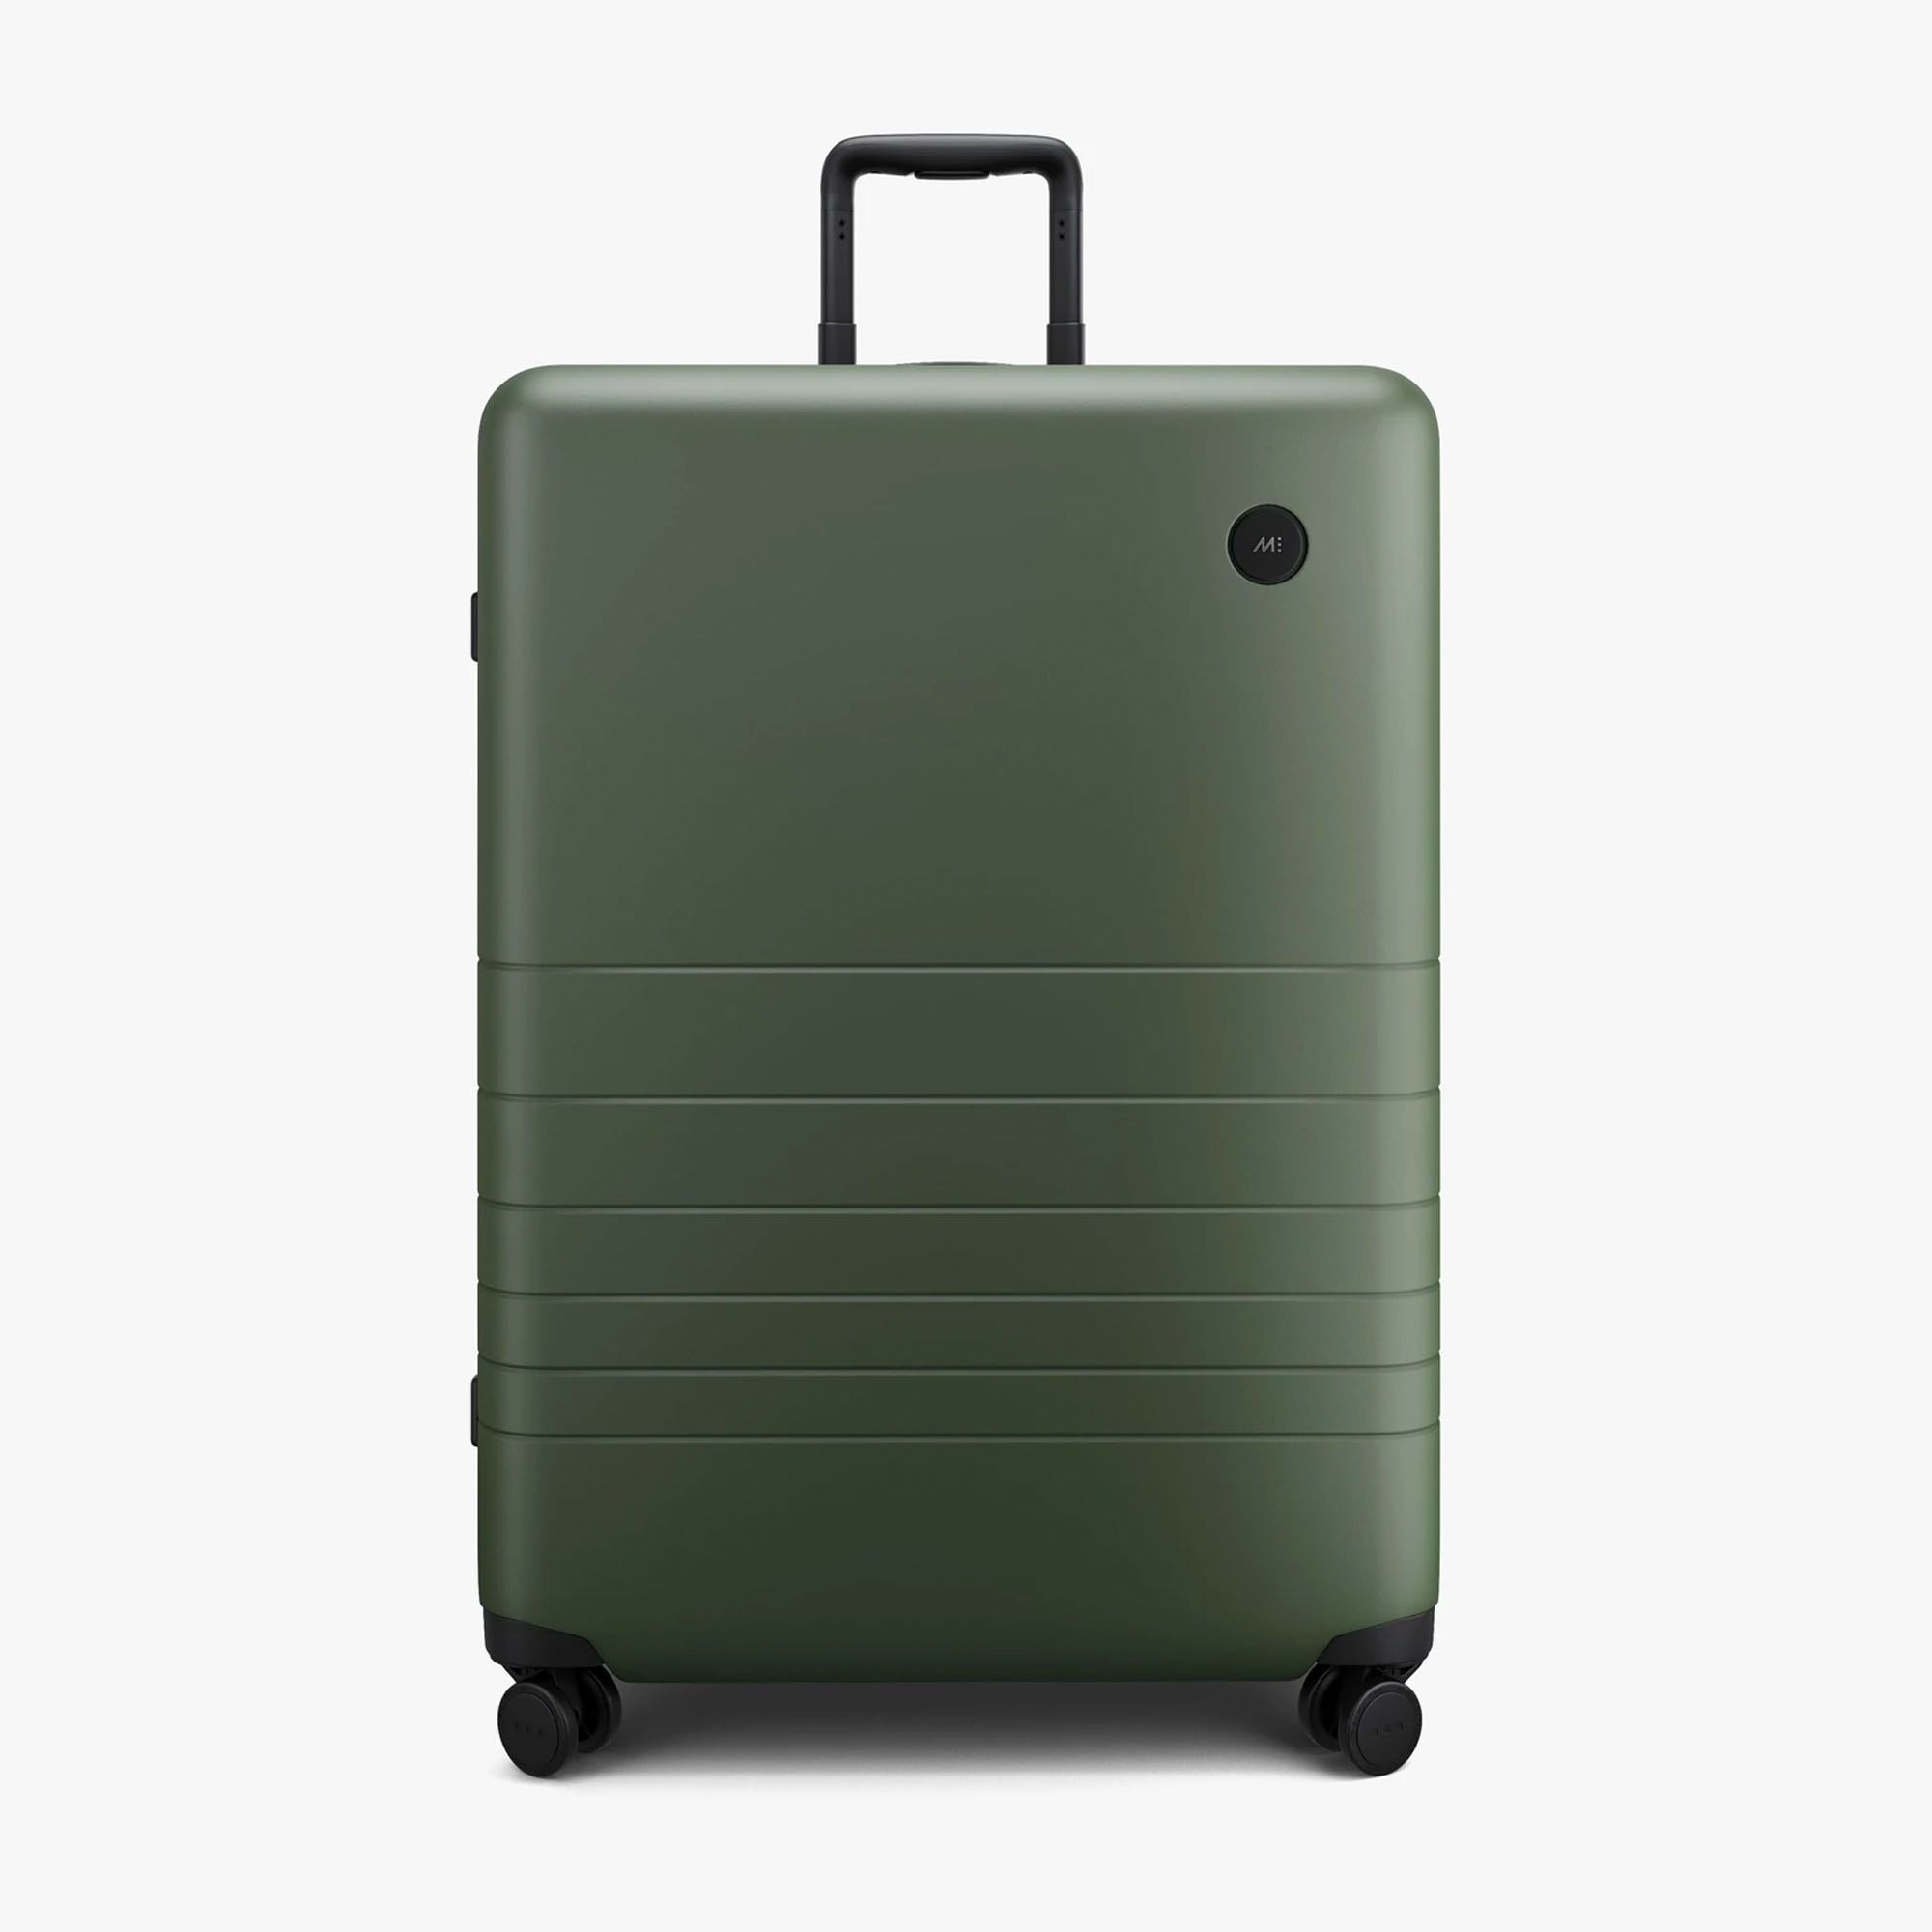 17 Best Luggage Brands of 2022 - Hard-Sided, Soft-Sided Suitcases